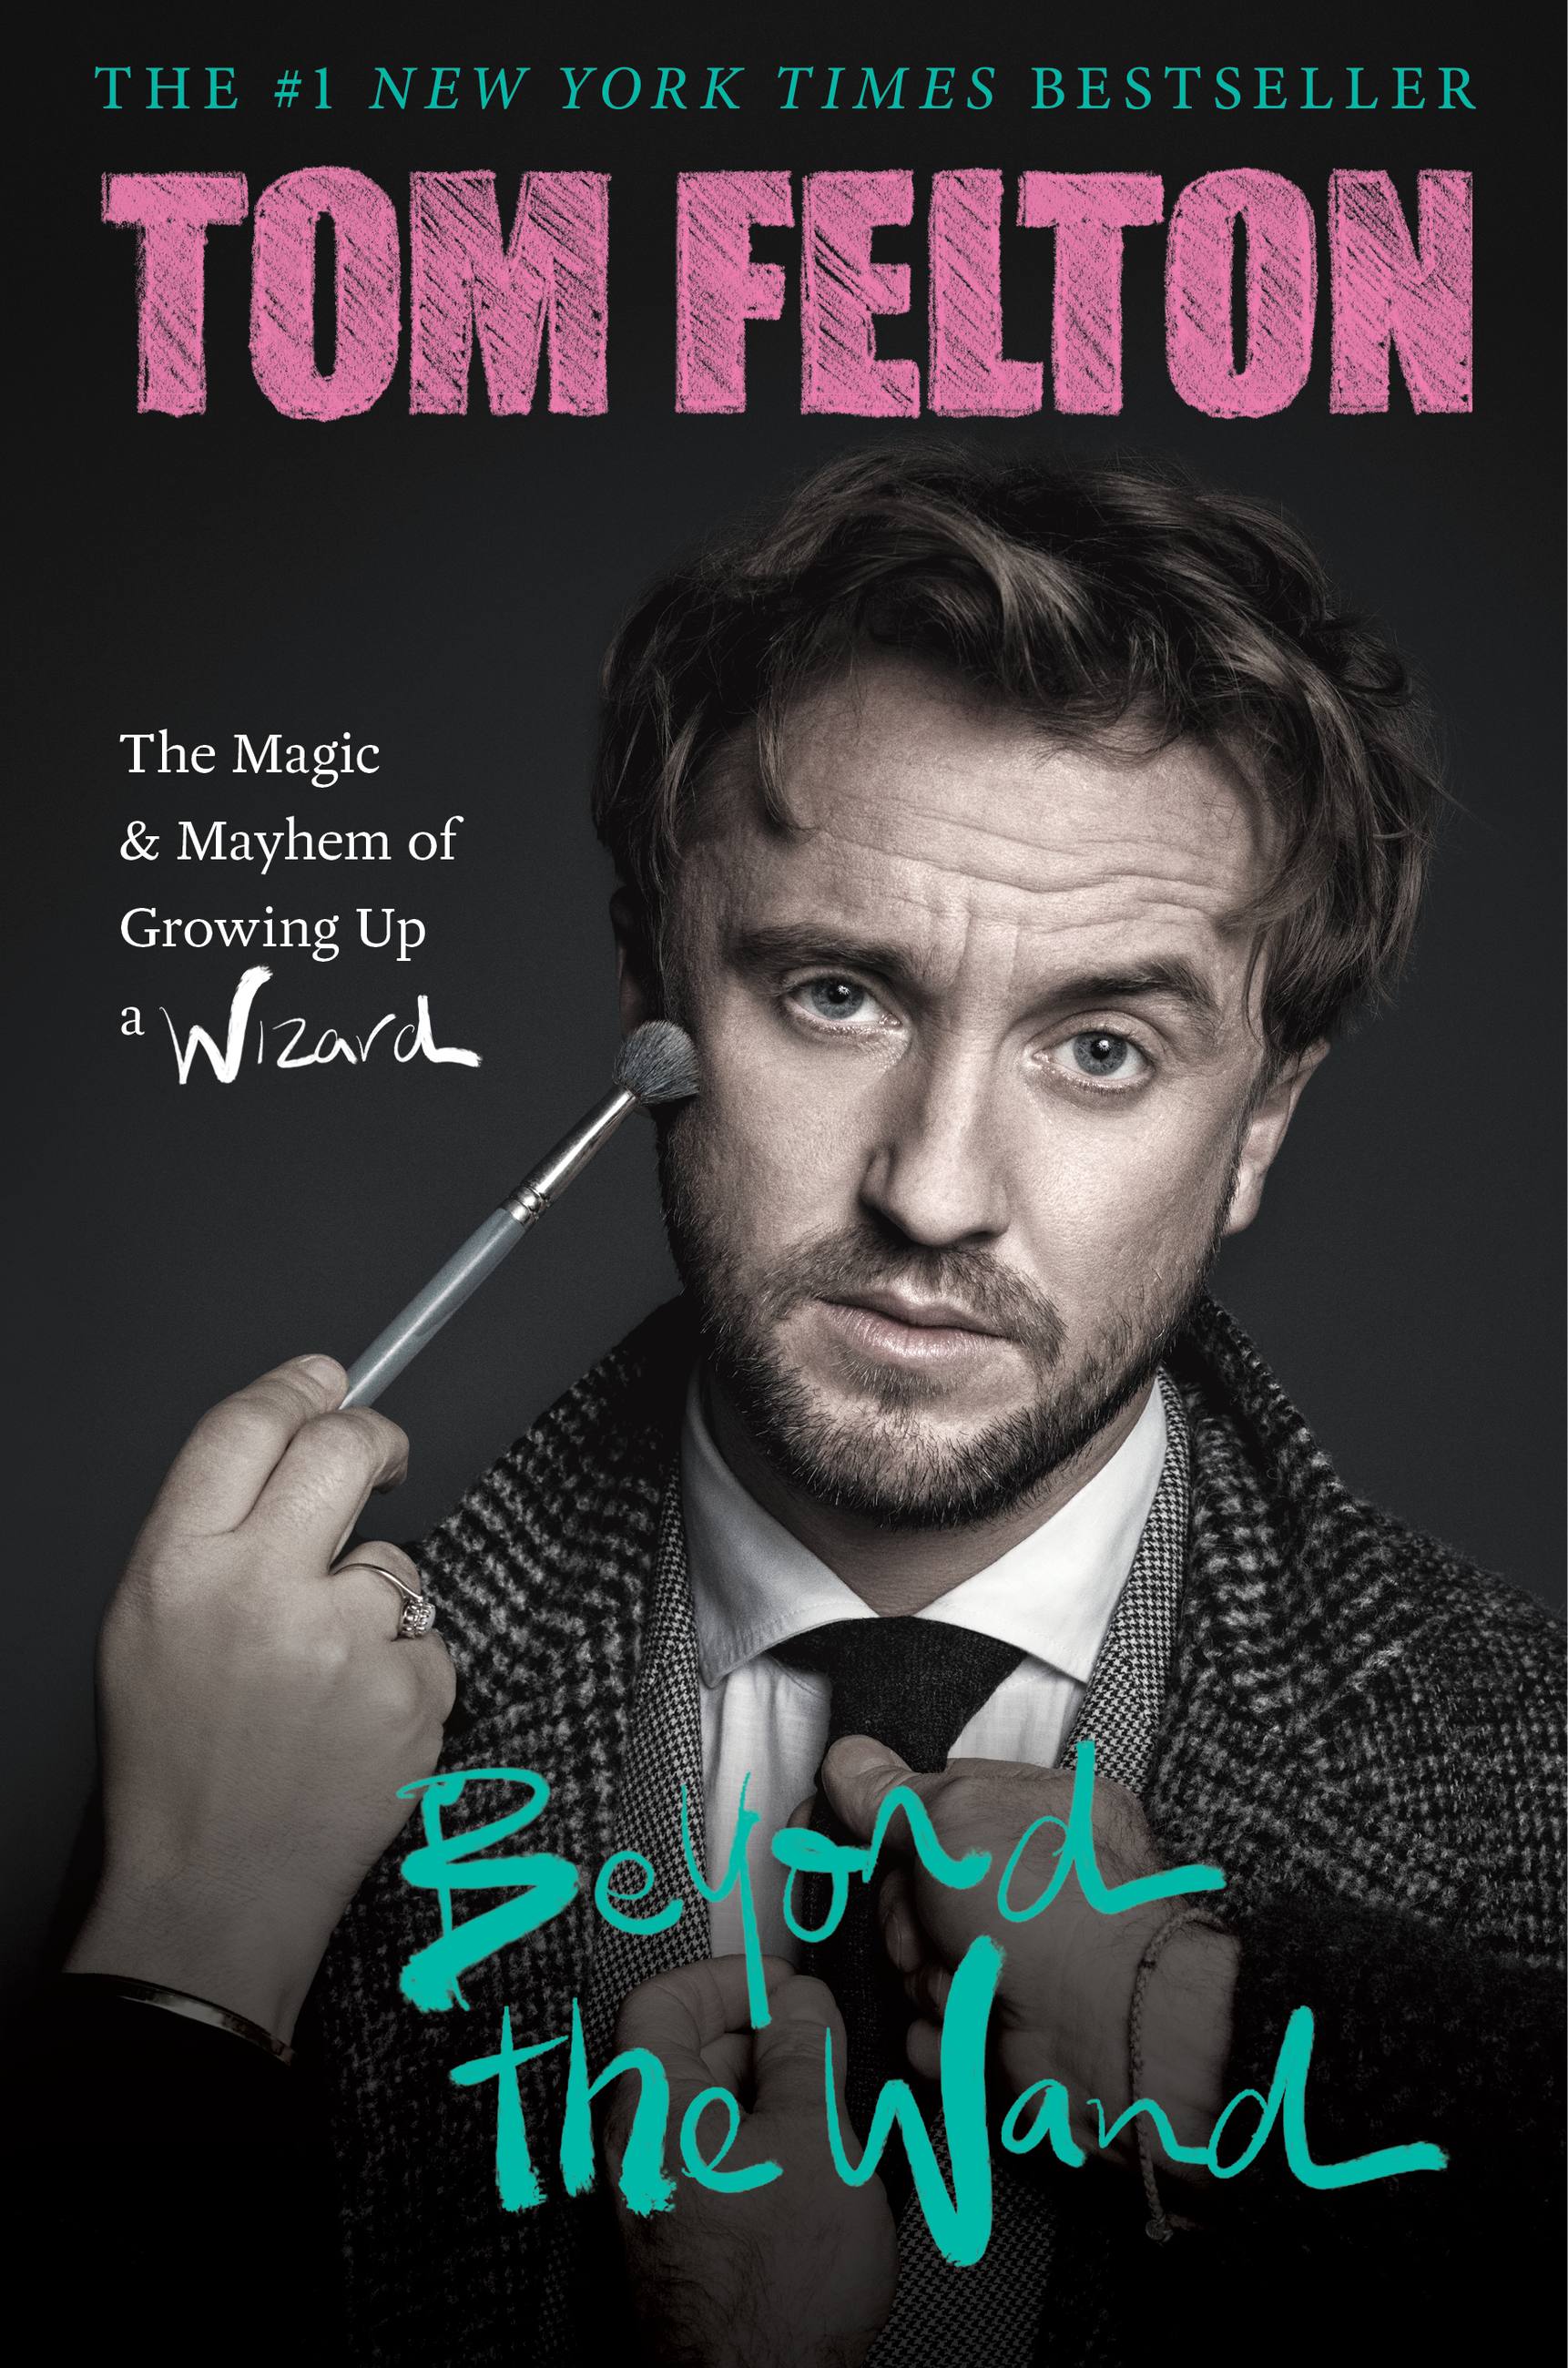 Beyond the Wand by Tom Felton | Hachette Book Group